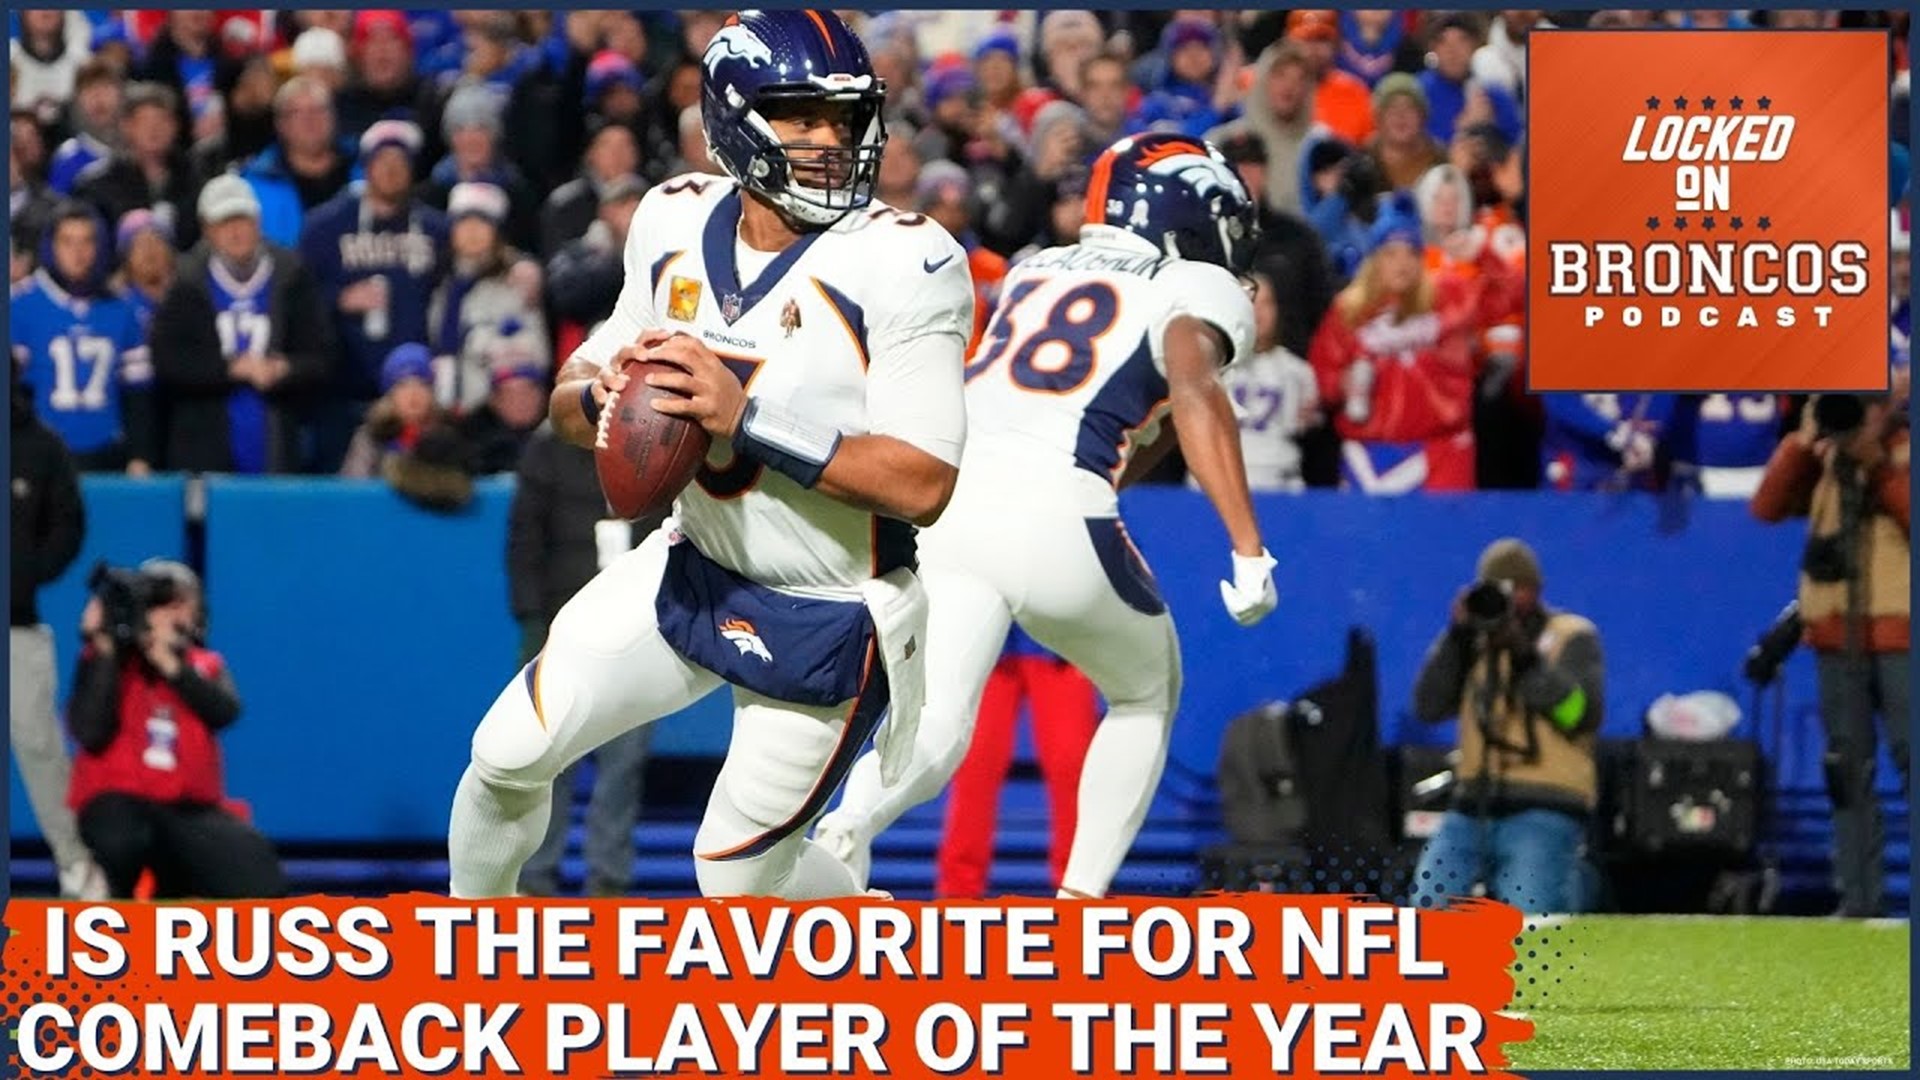 Has Russell Wilson jumped into the driver seat of NFL Comeback Player of the Year?